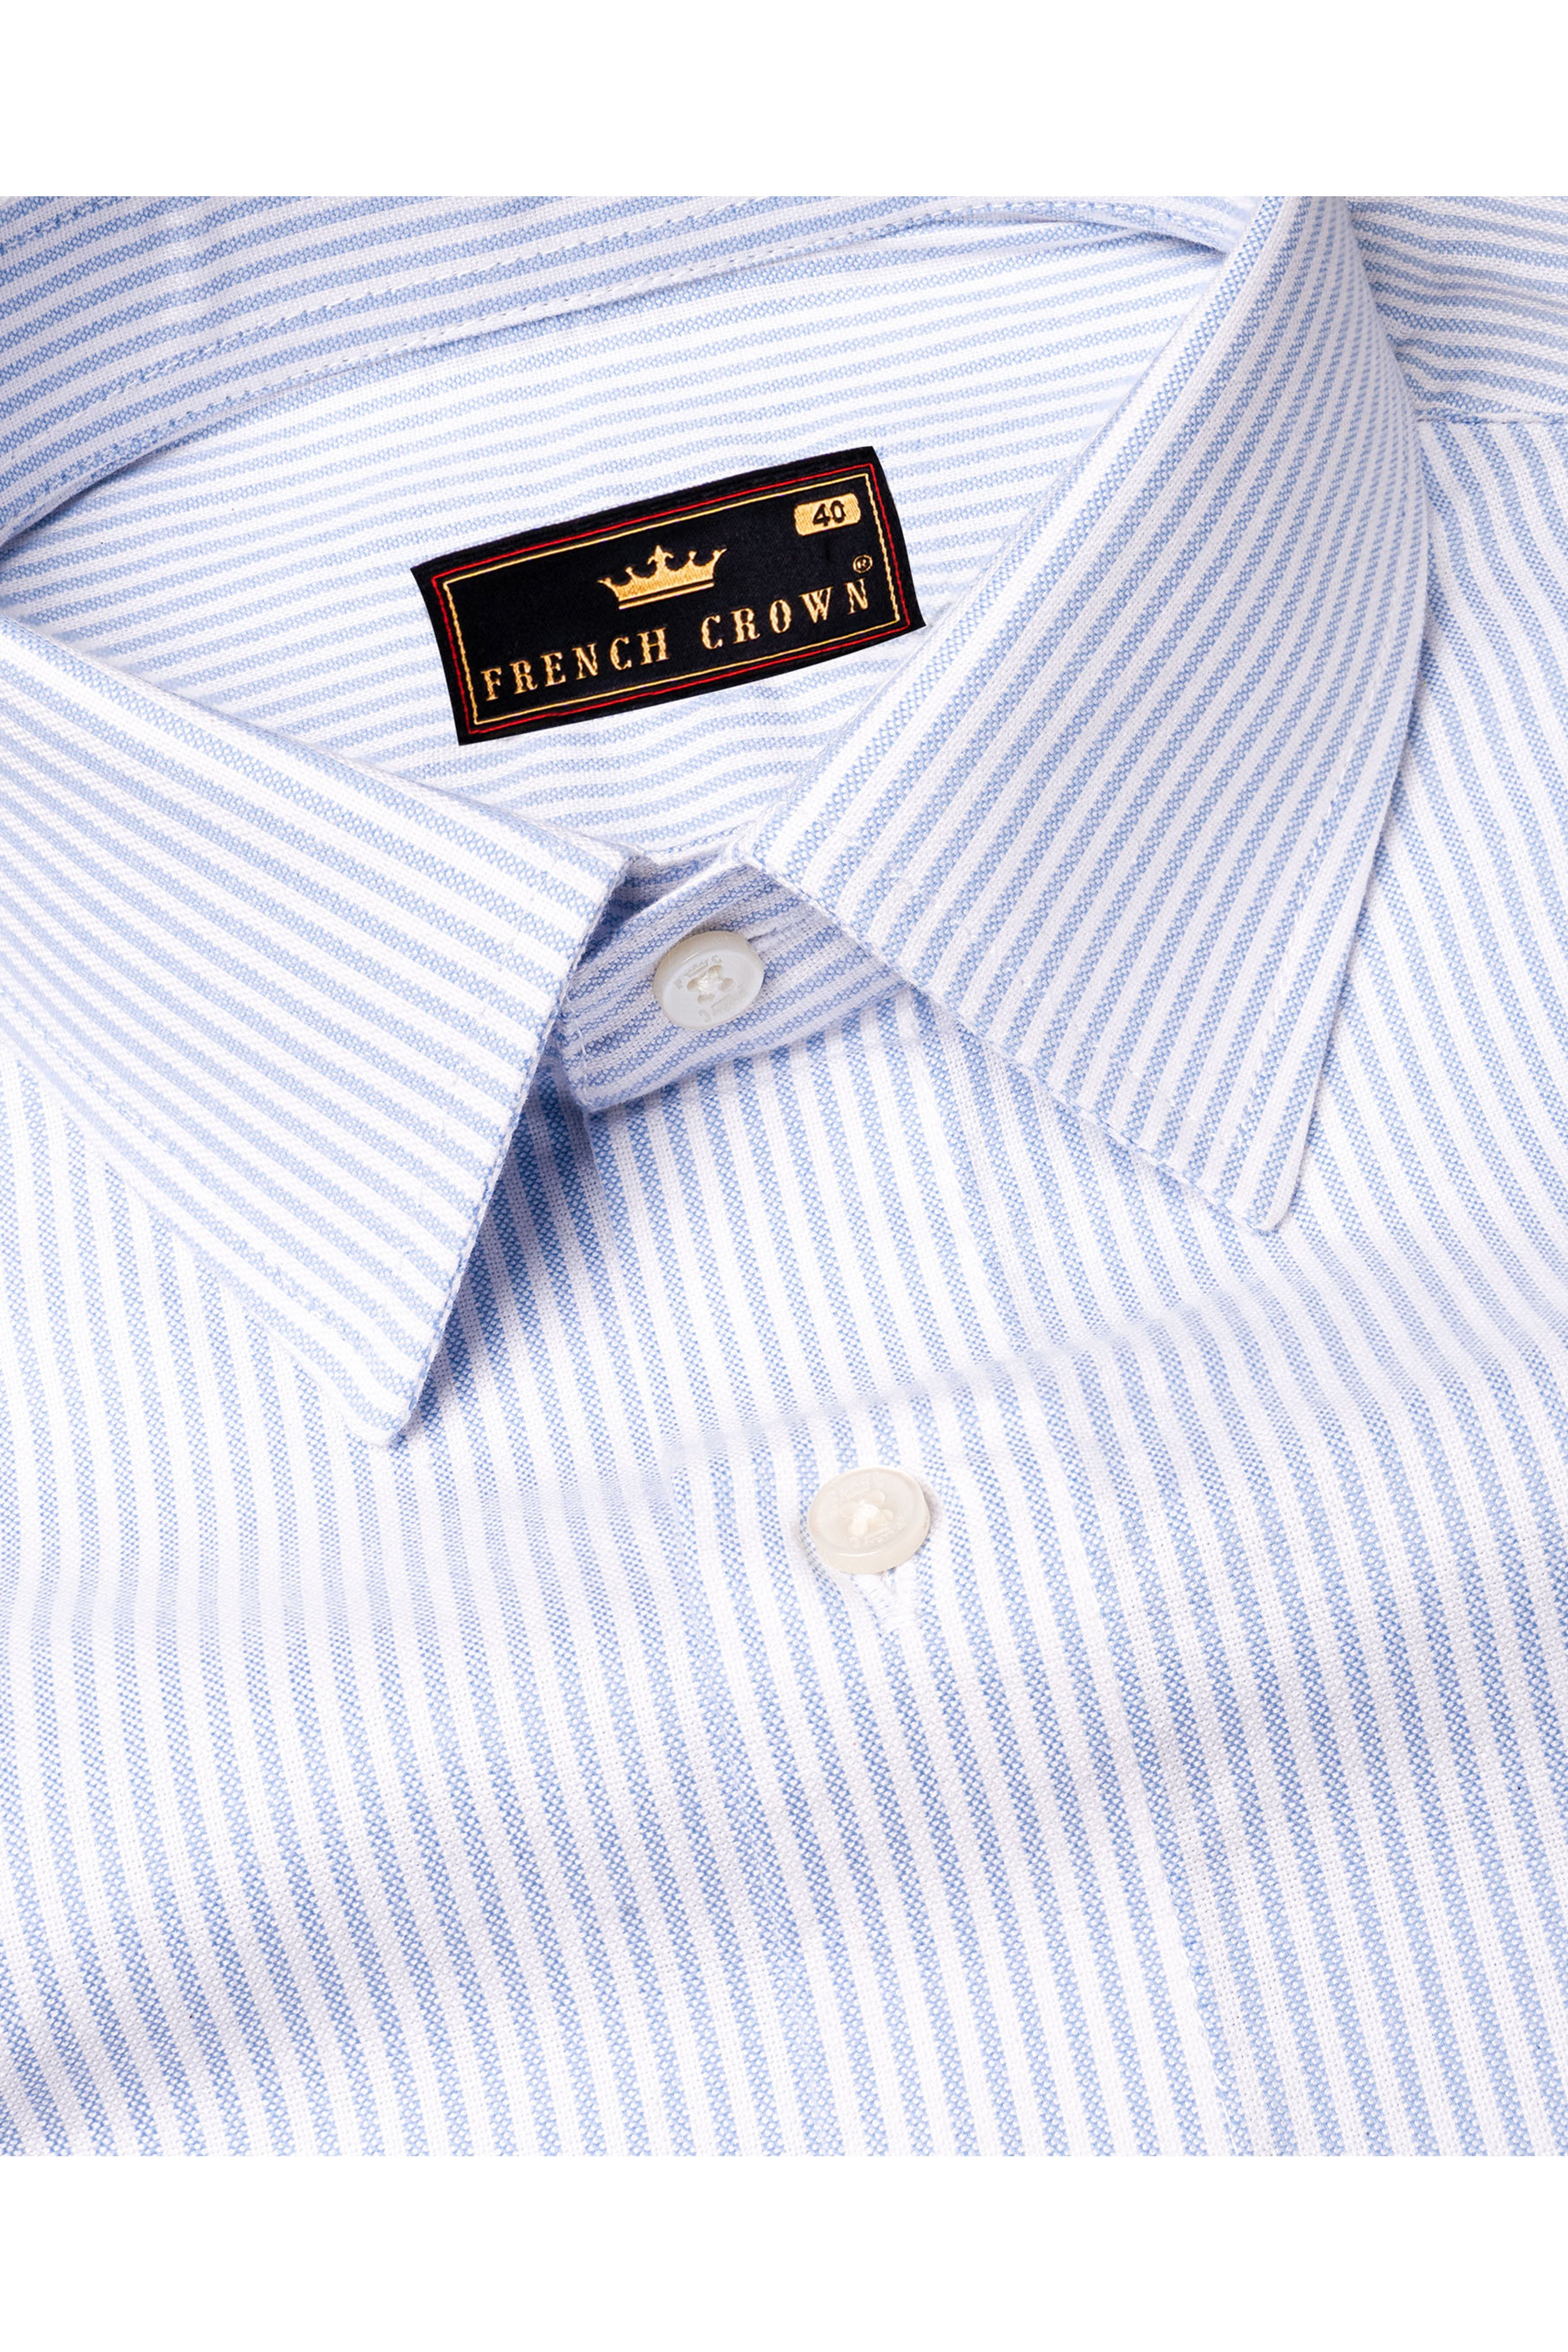 Bright White and Porcelain Blue Pinstriped with Funky Printed Royal Oxford Designer Shirt